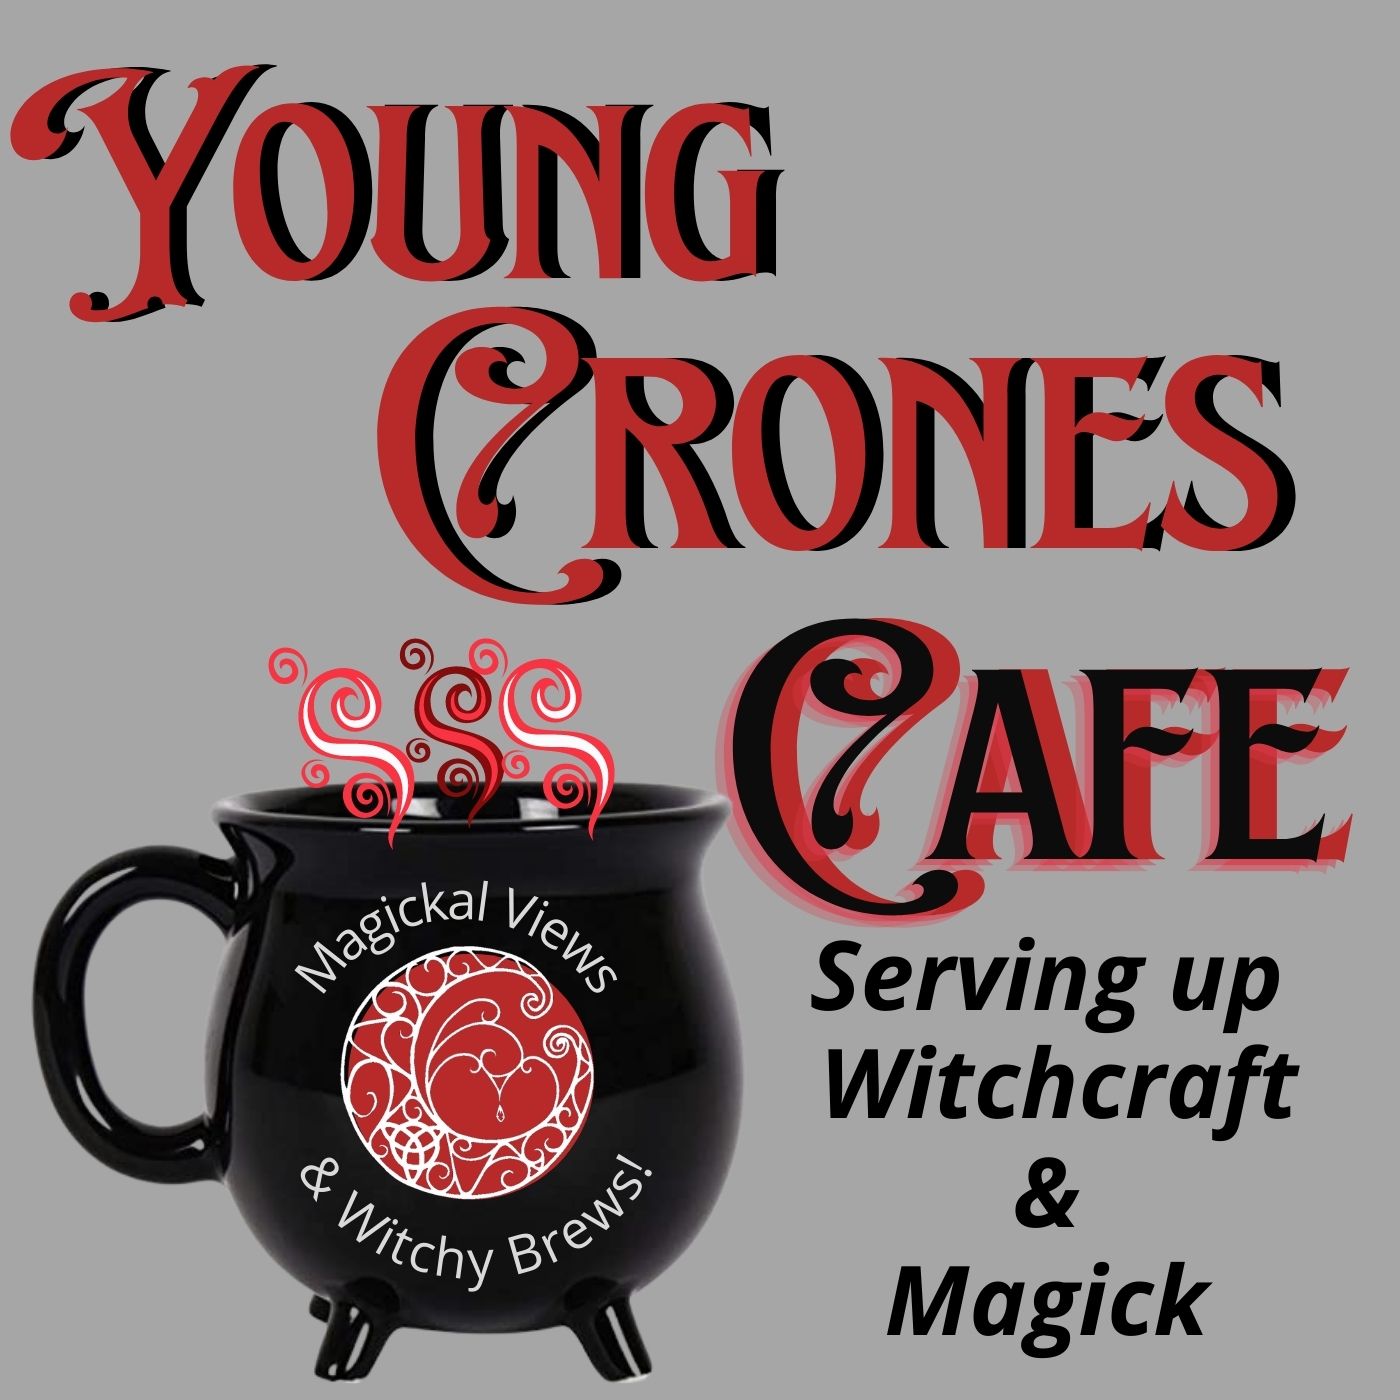 Young Crones Cafe